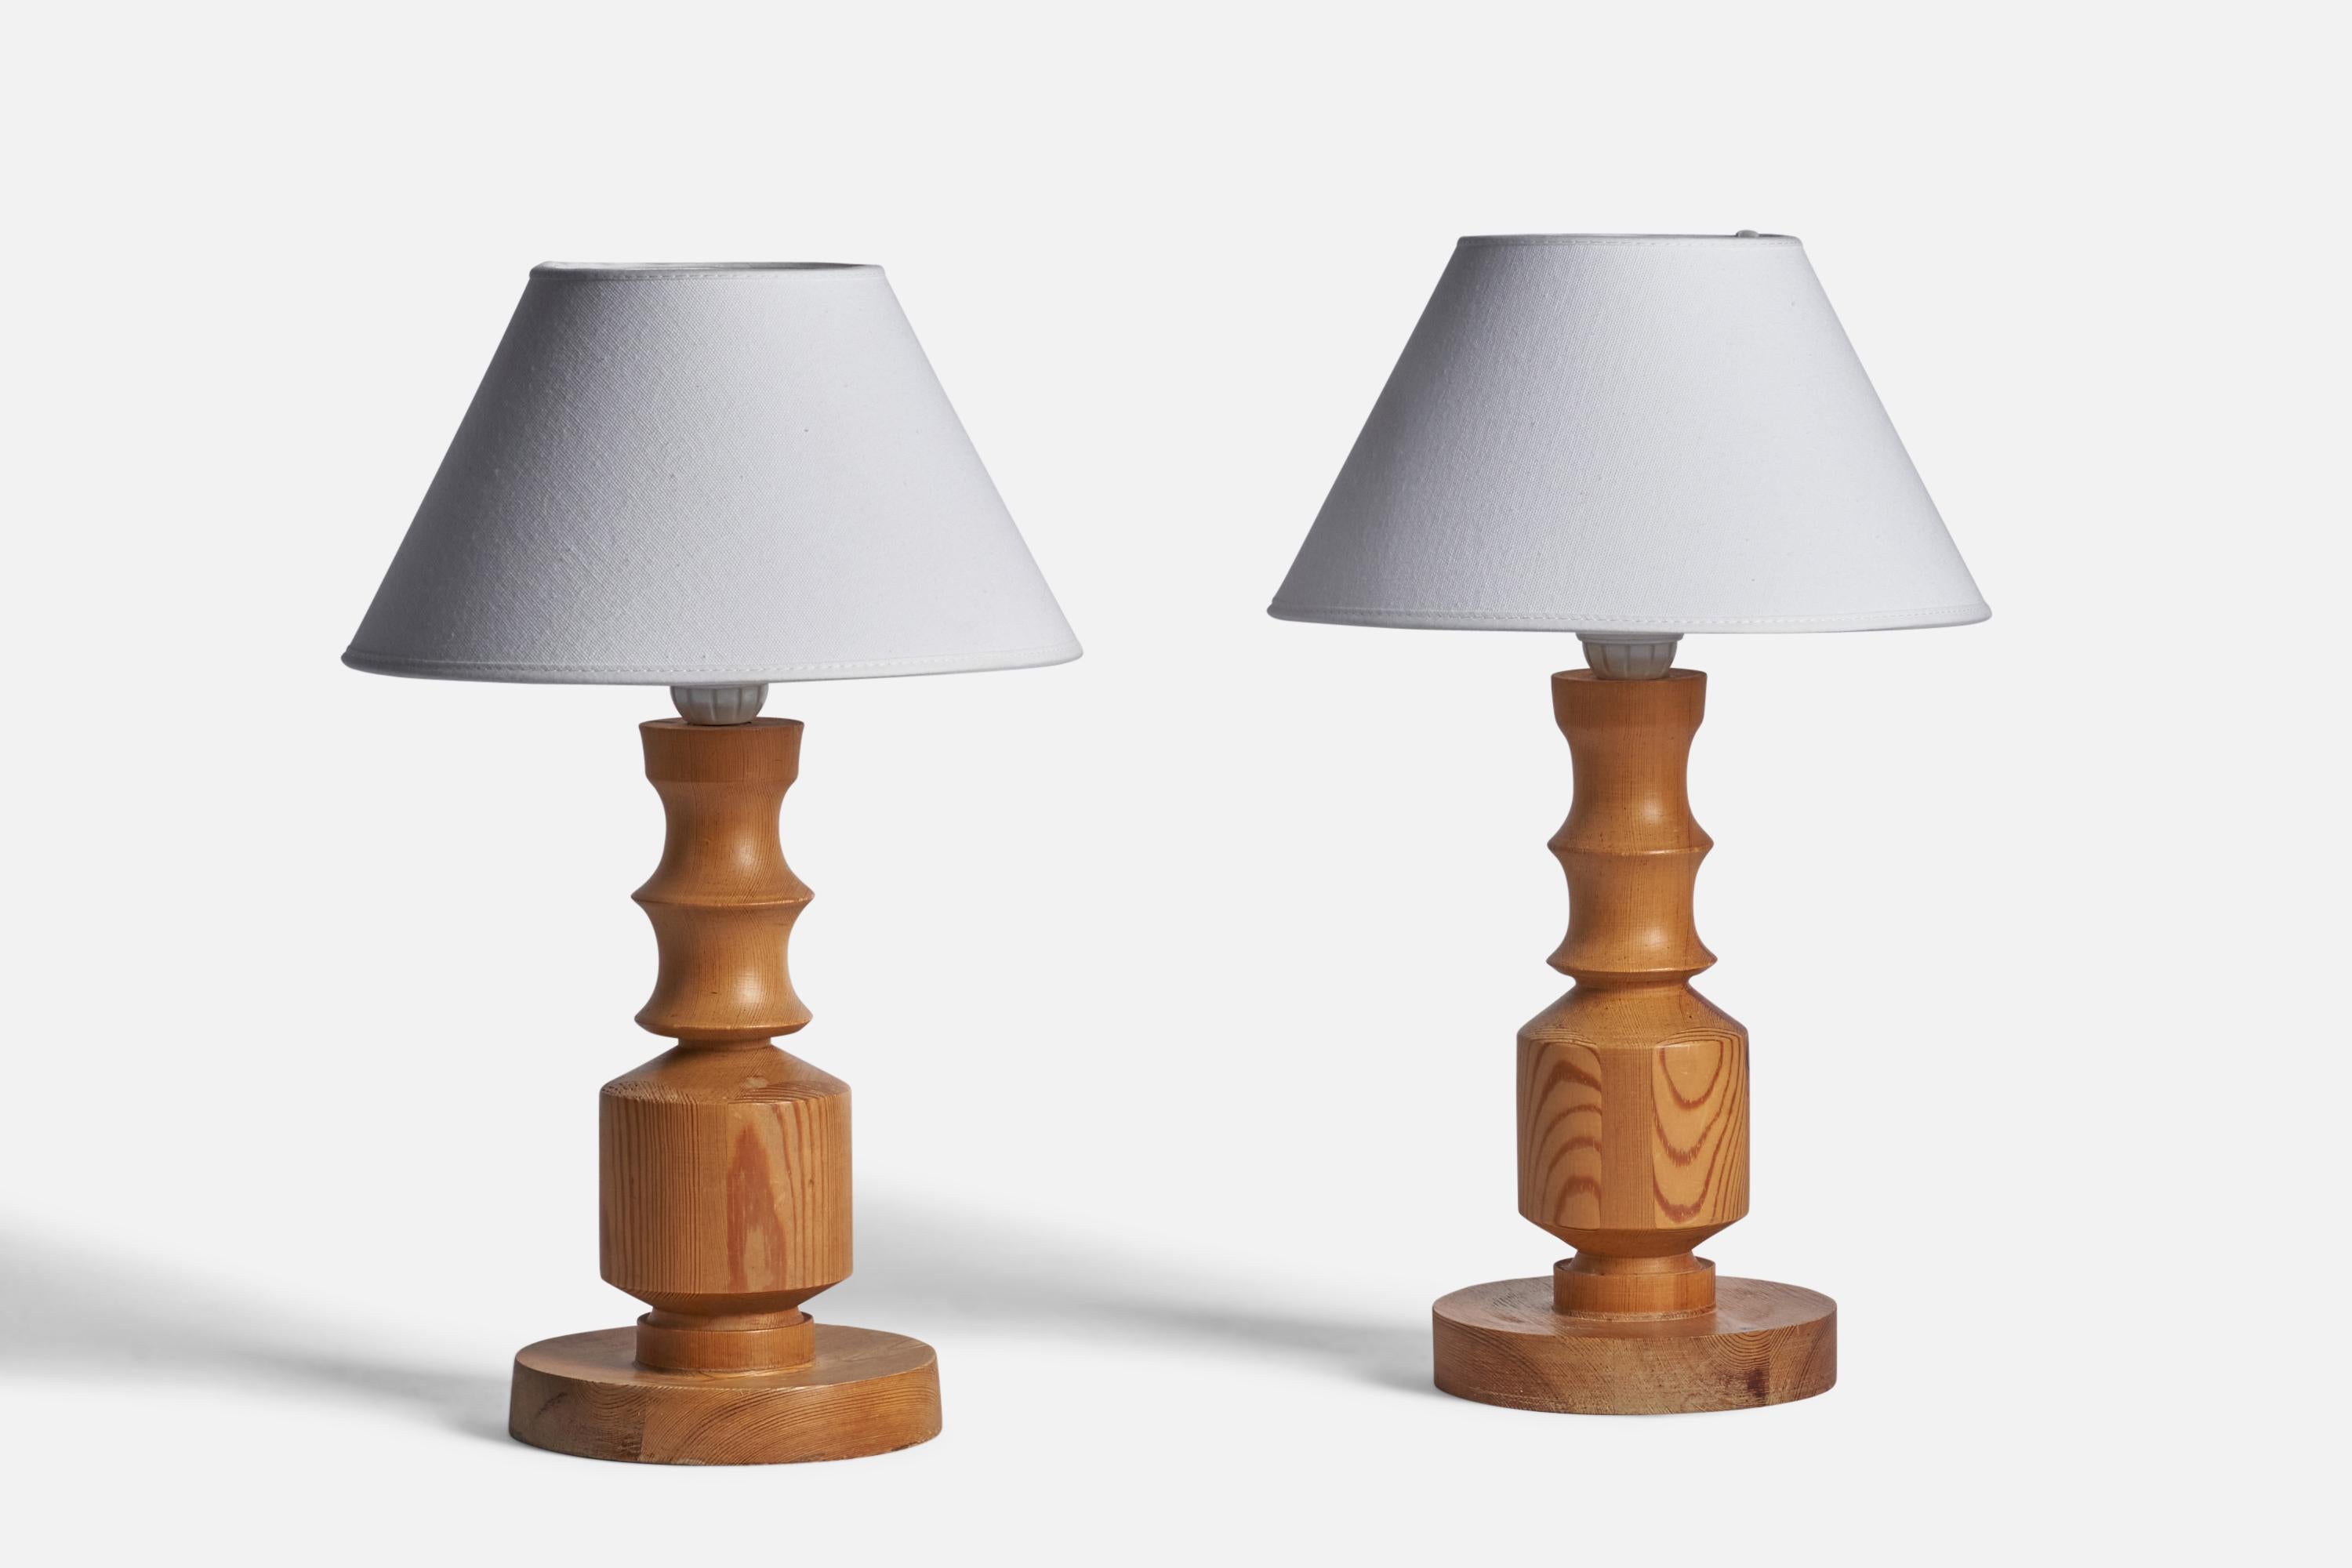 A pair of pine table lamps designed and produced in Sweden, 1970s.

Dimensions of Lamp (inches): 12